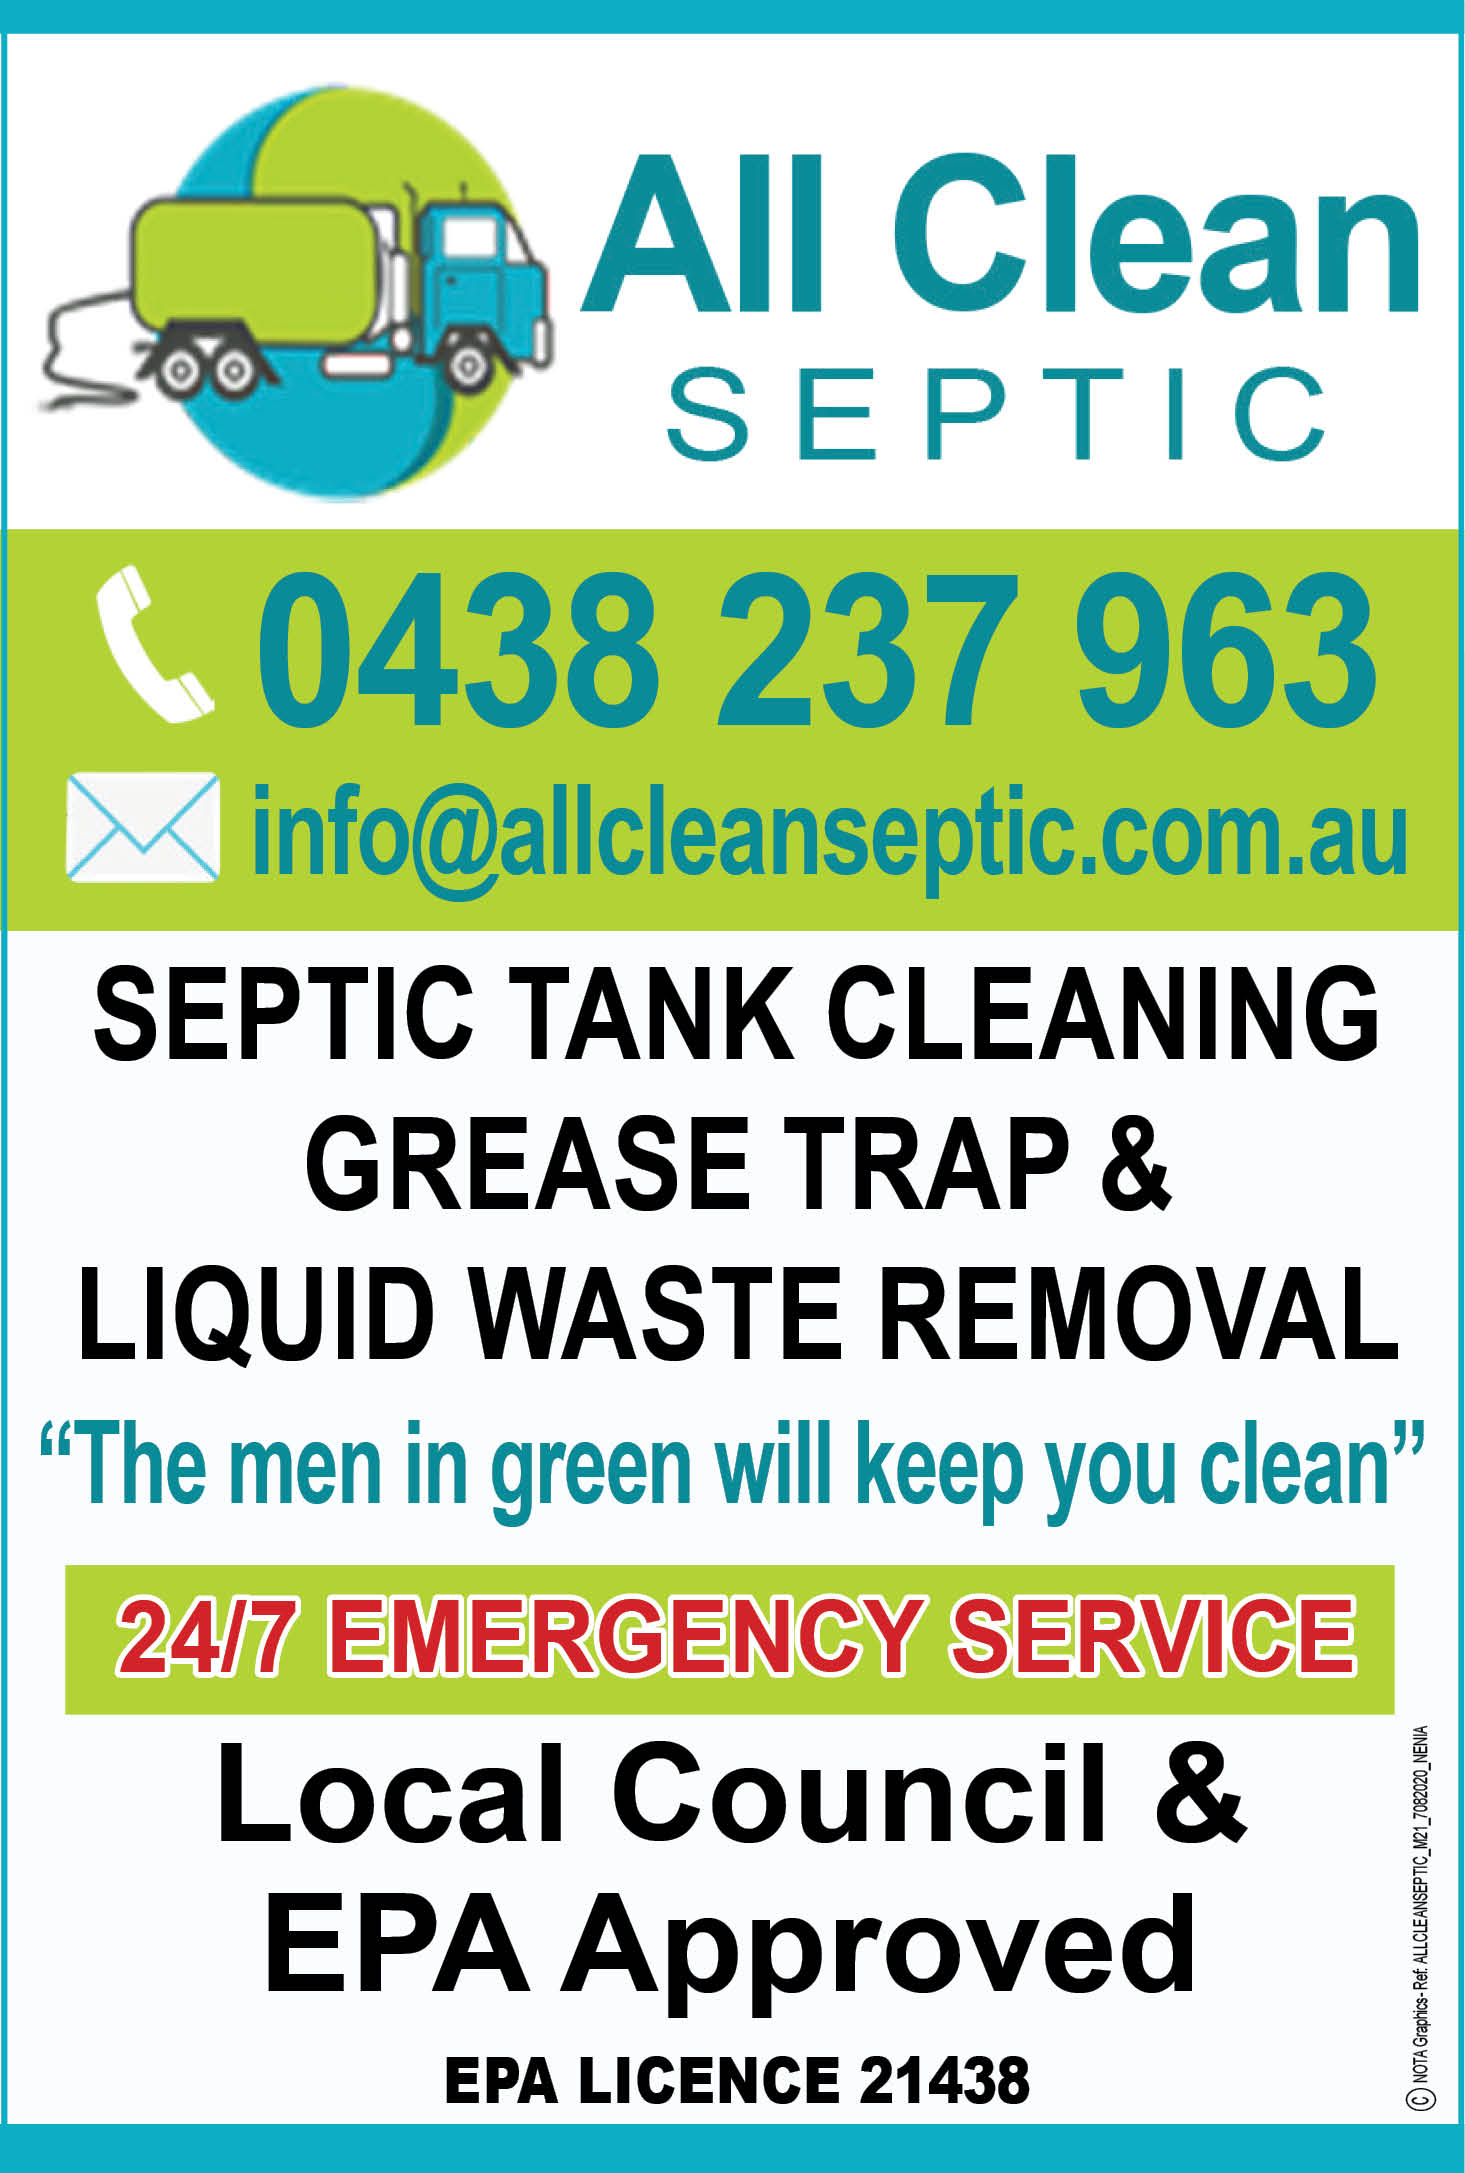 All Clean Septic